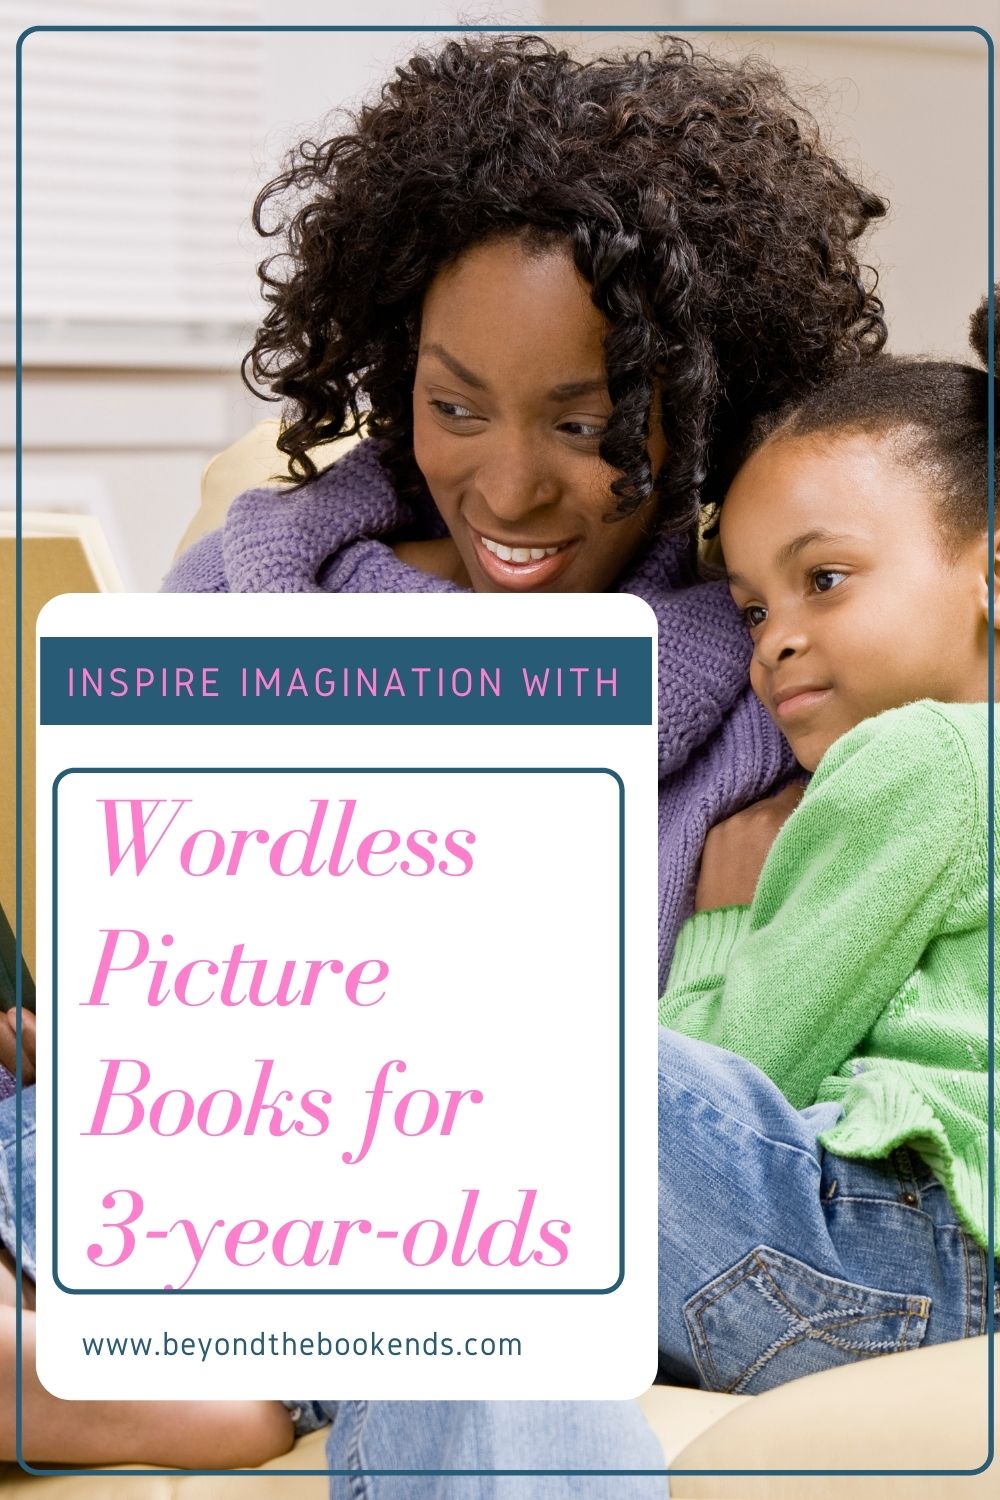 Wordless Picture Books for 3-year-olds